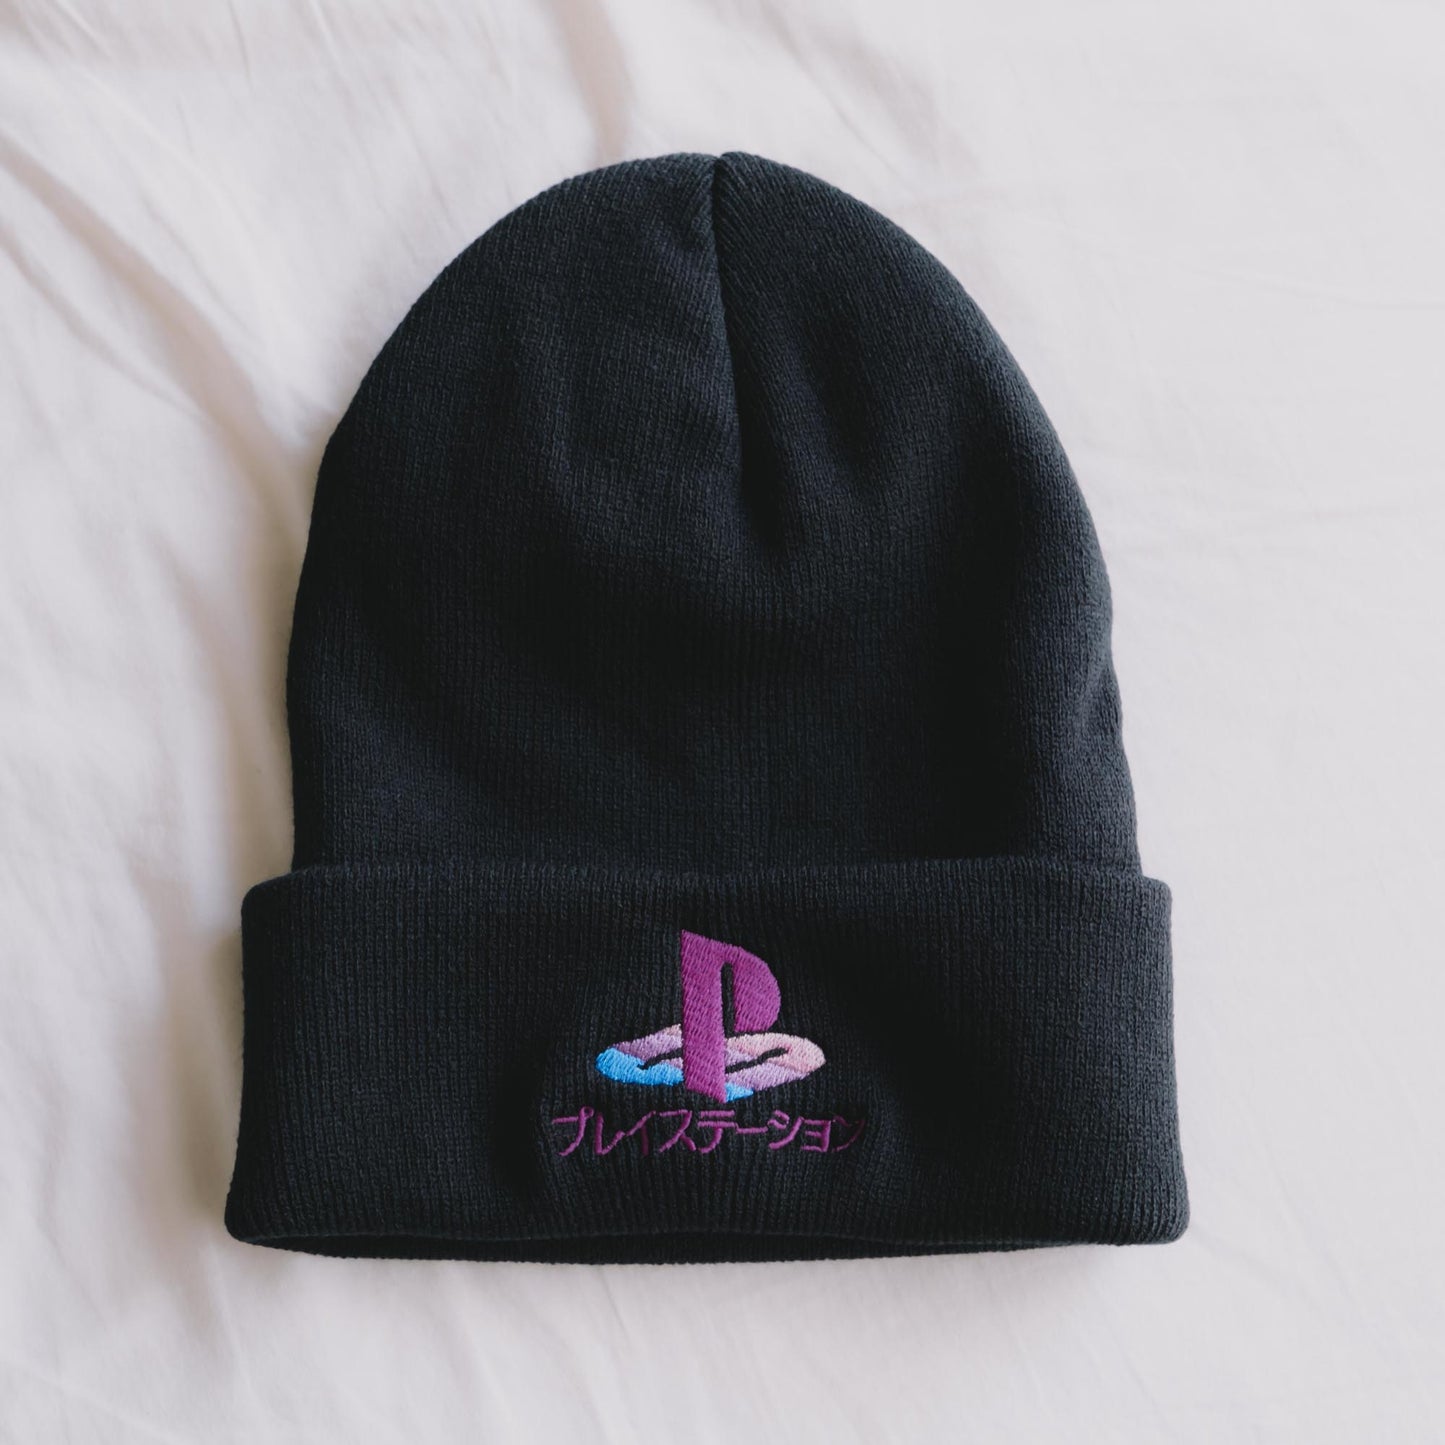 PS Vaporwave Retro Gaming Embroidered Beanie